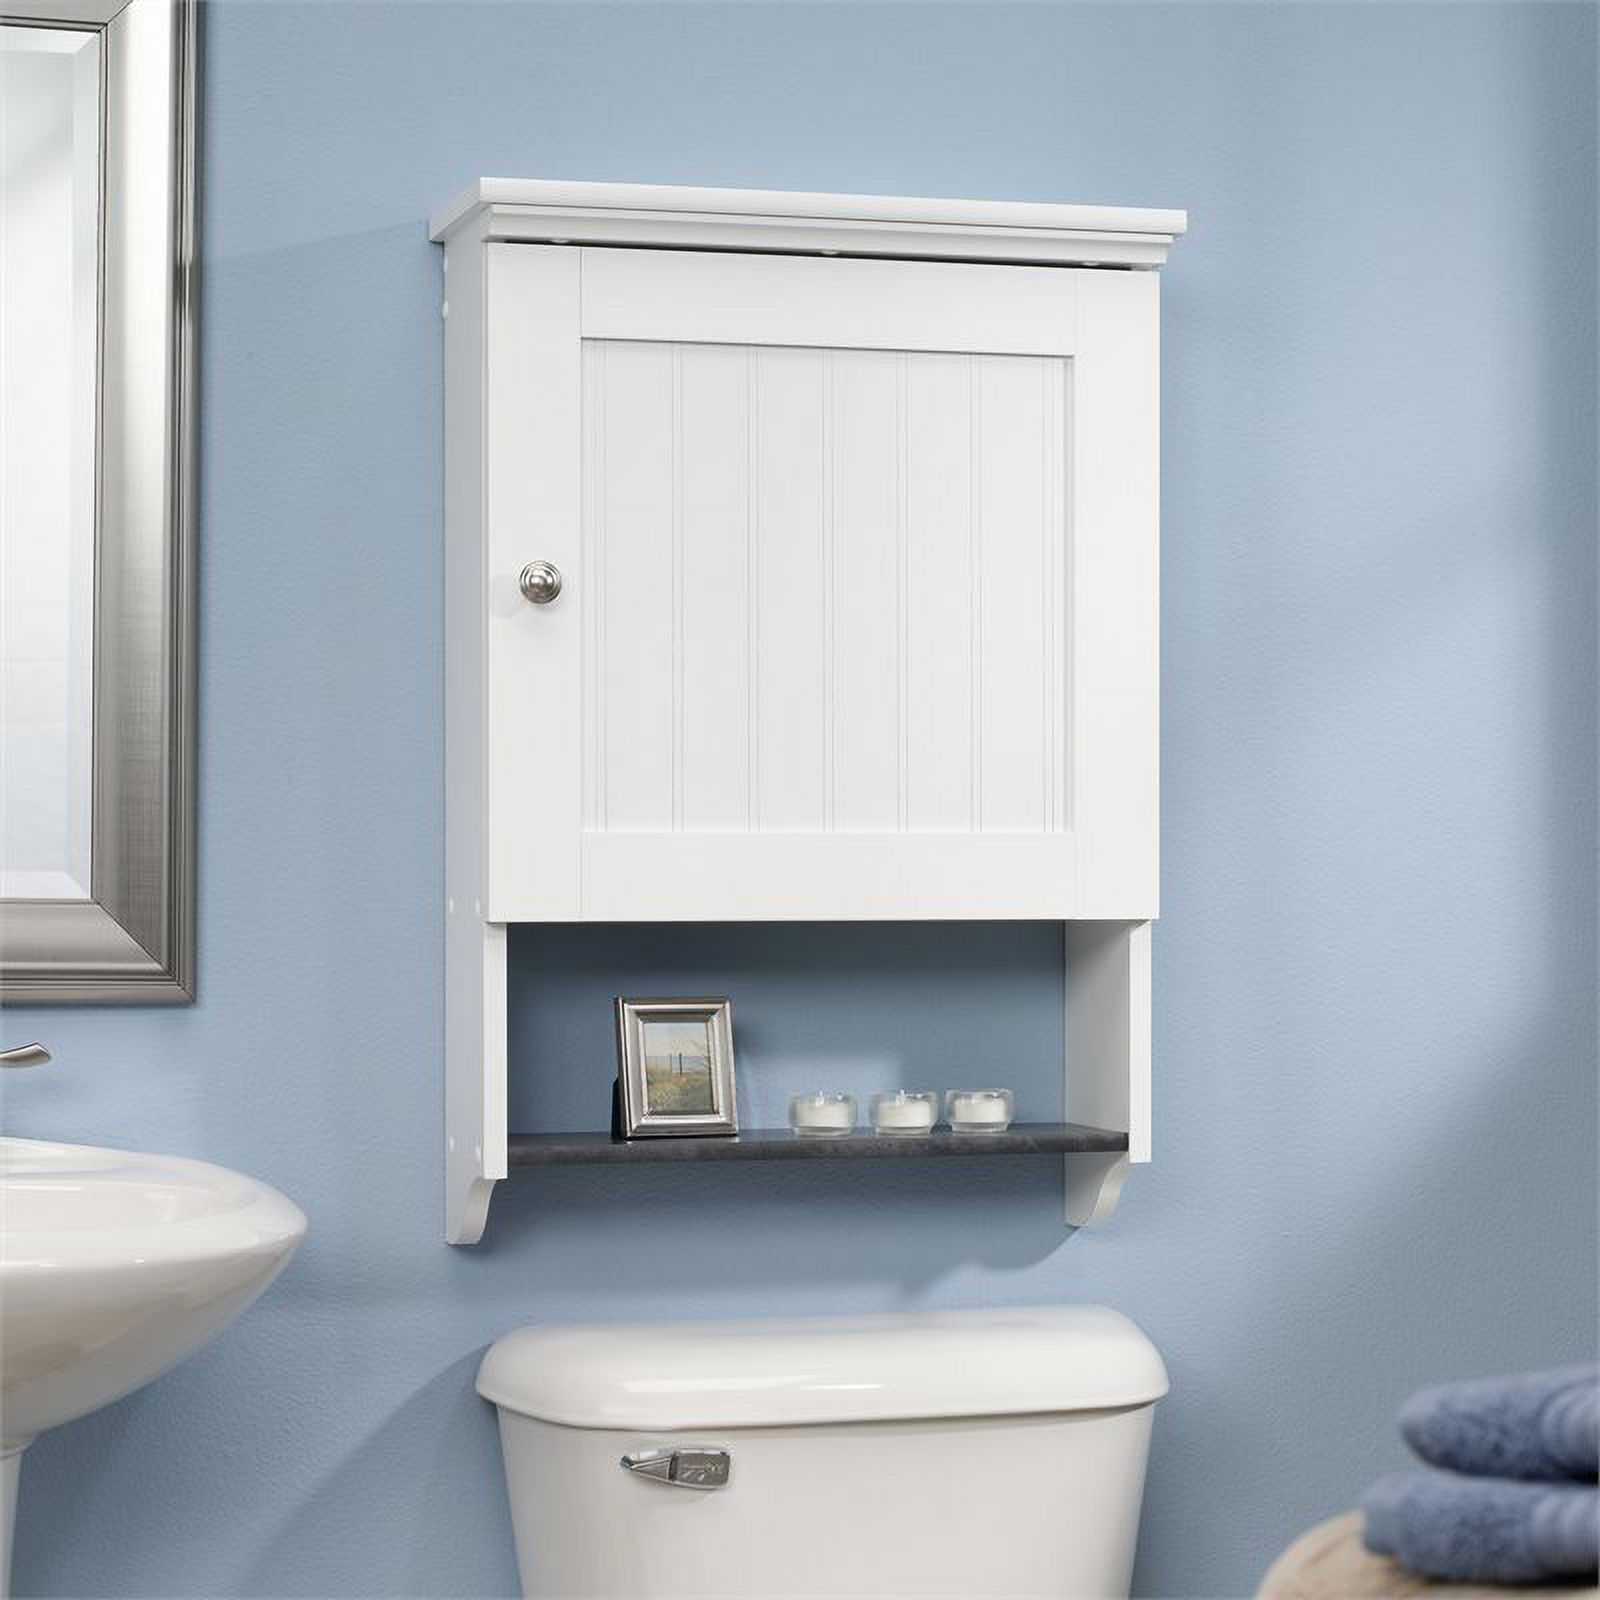 Sauder 414061 Caraway Wall Cabinet, Soft White® Finish - image 2 of 4